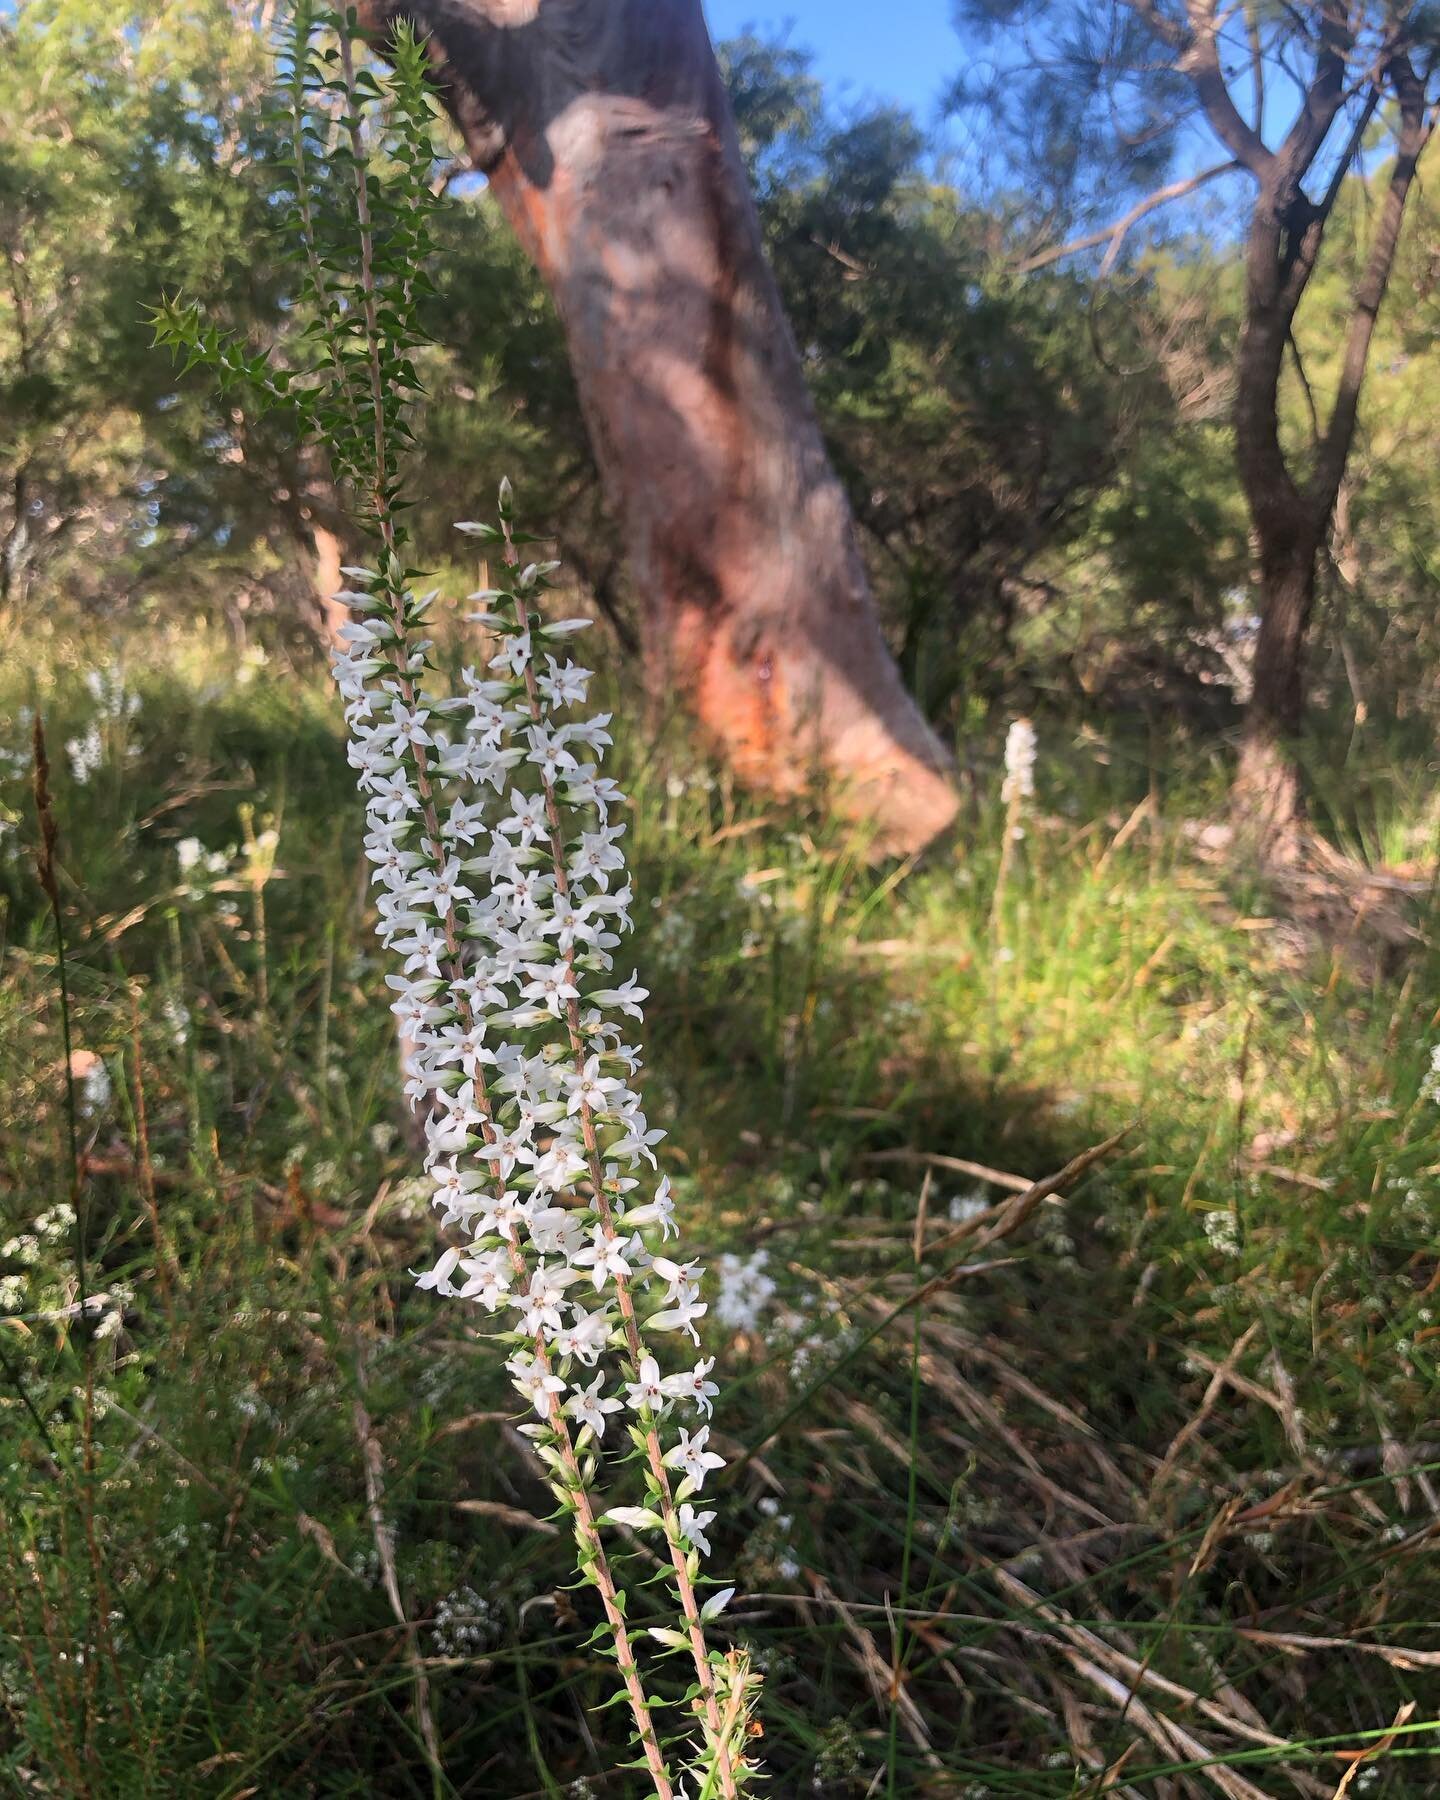 Look out for these delightful blooms, visible now on the heathland community of the Sydney region #epacrispulchella #epacrislongiflora #dharawalcountry #royalnationalpark